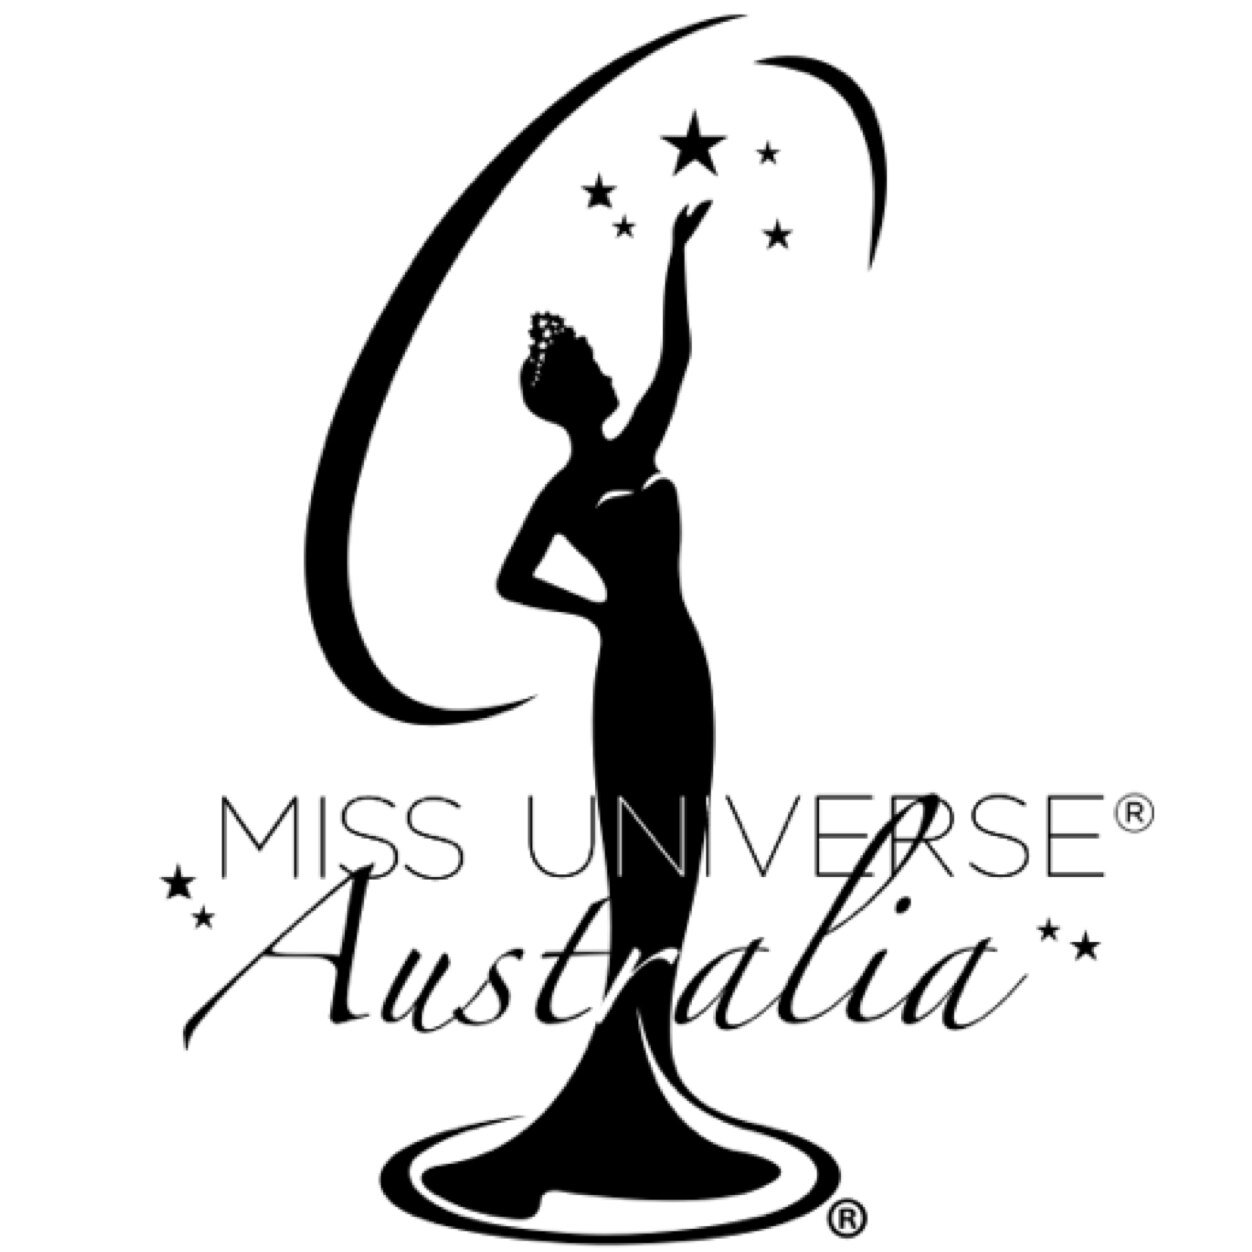 The National Director for Miss Universe Australia, Deborah Miller, welcomes you all to follow us on twitter for all the latest news!